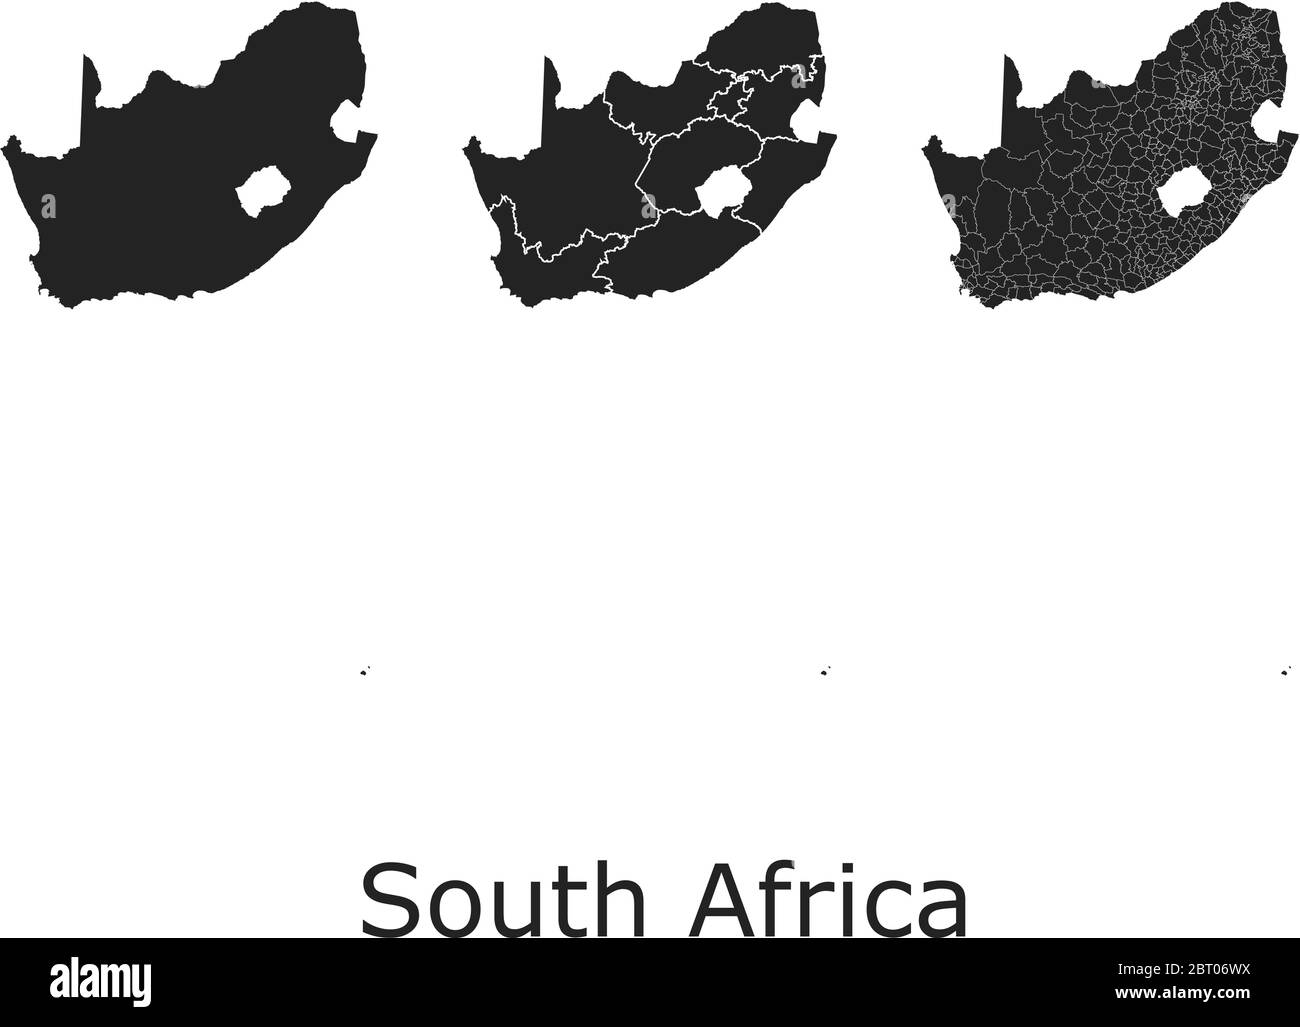 South Africa vector maps with administrative regions, municipalities, departments, borders Stock Vector